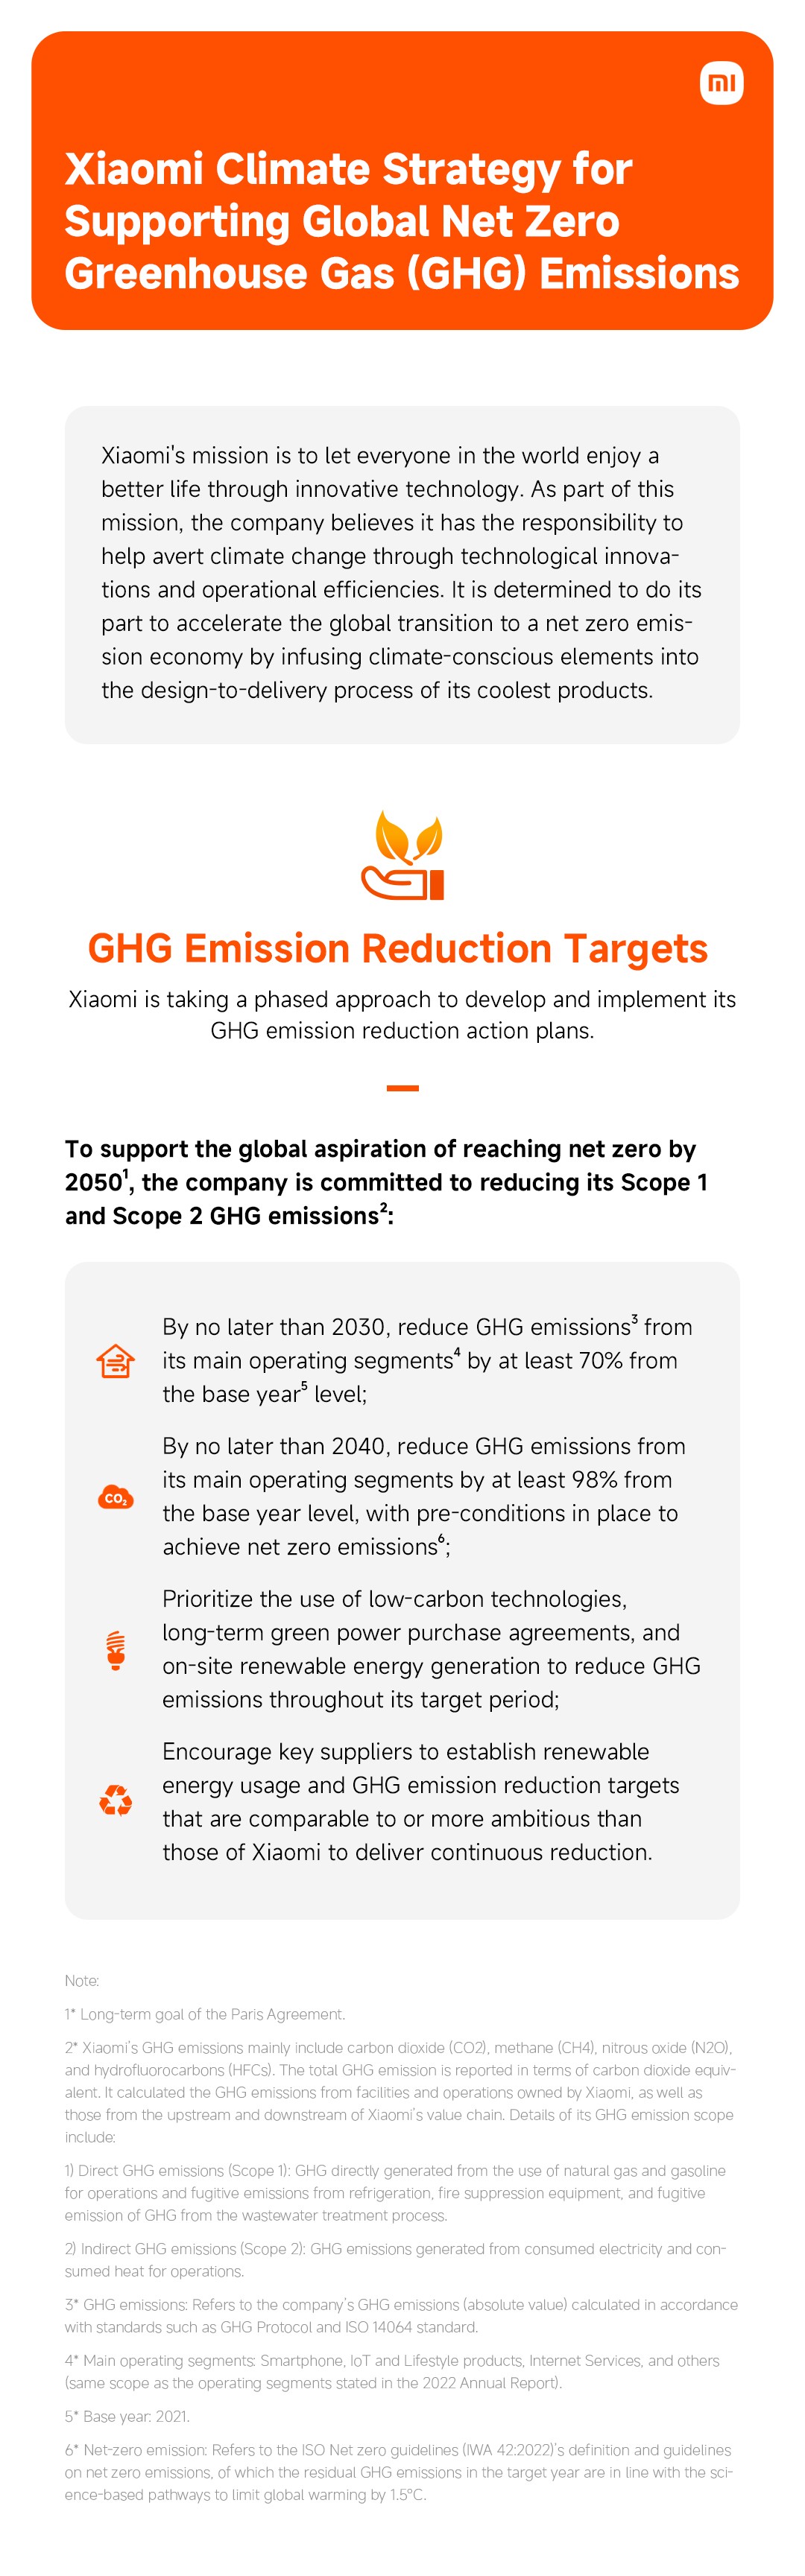 xiaomi-climate-strategy-emission-reduction-targets-1682649215.jpg